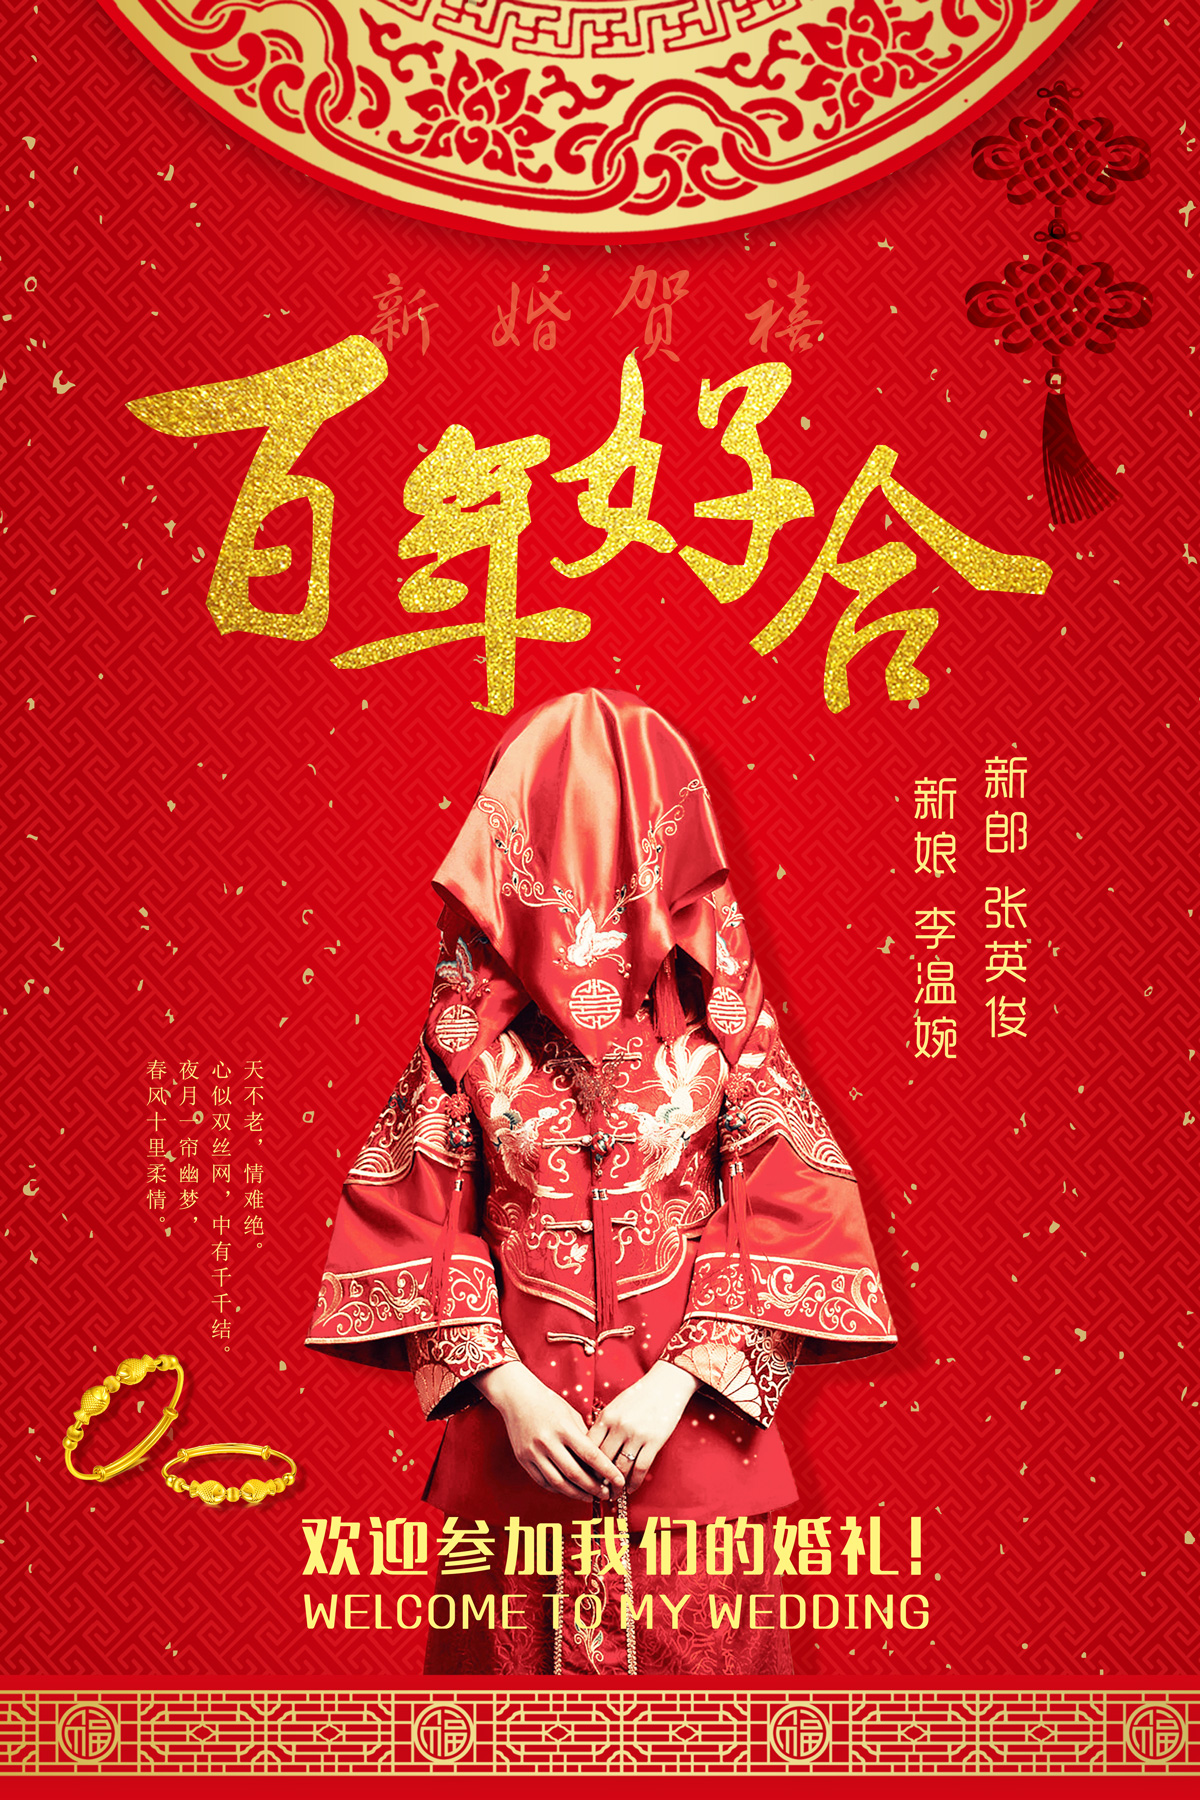 Festive Chinese Wedding Poster China PSD File Free Download